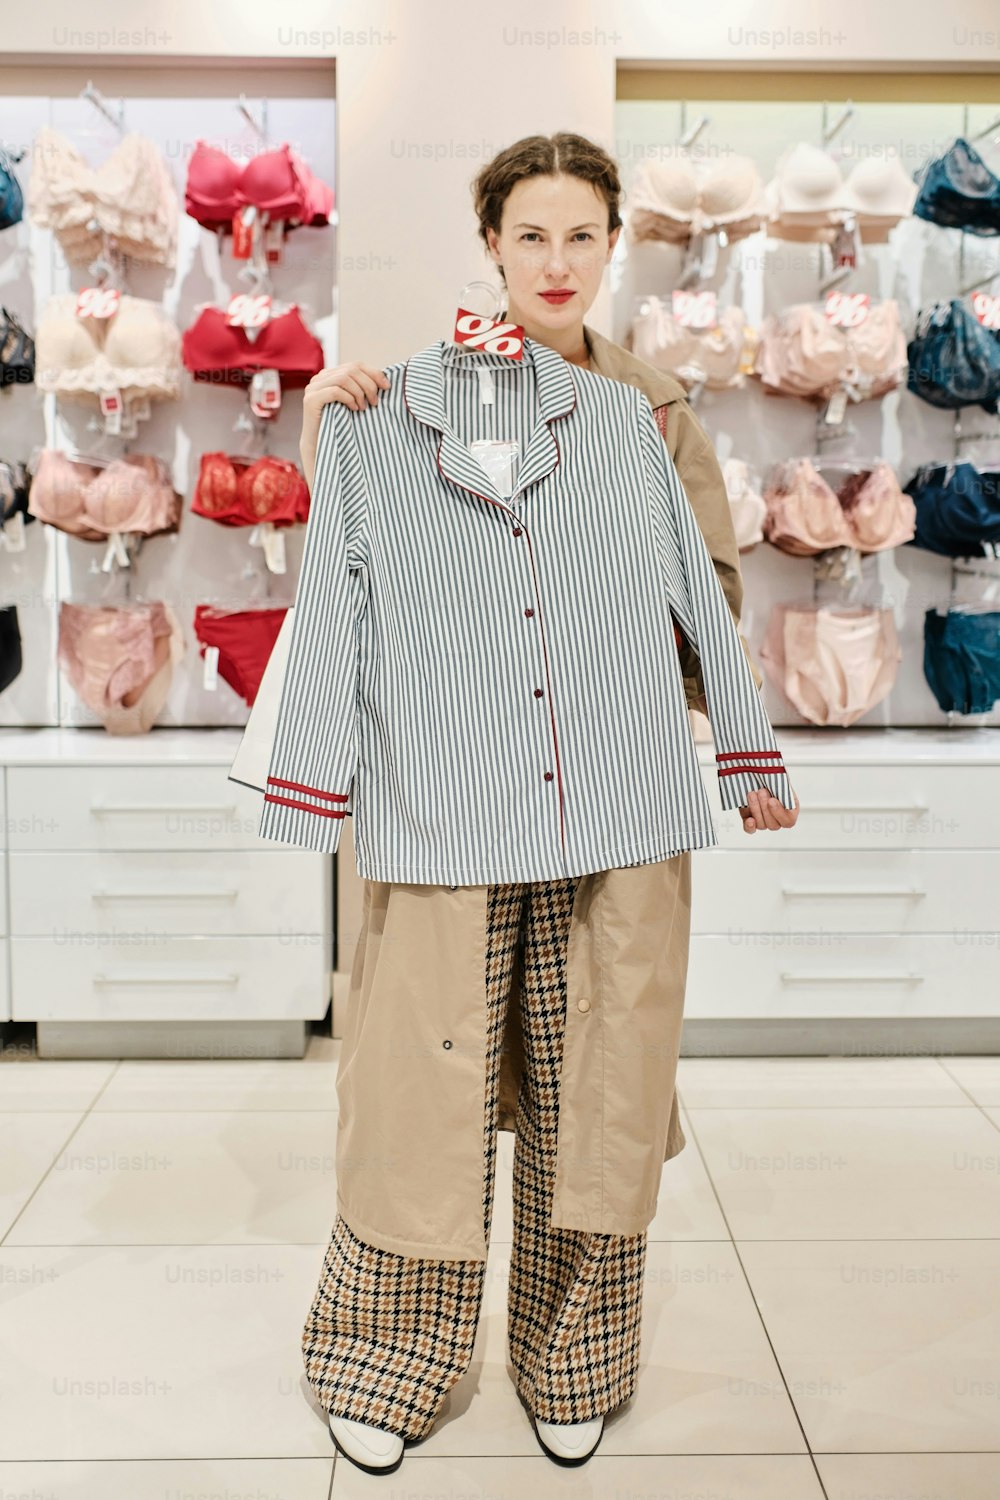 a woman standing in front of a display of clothing